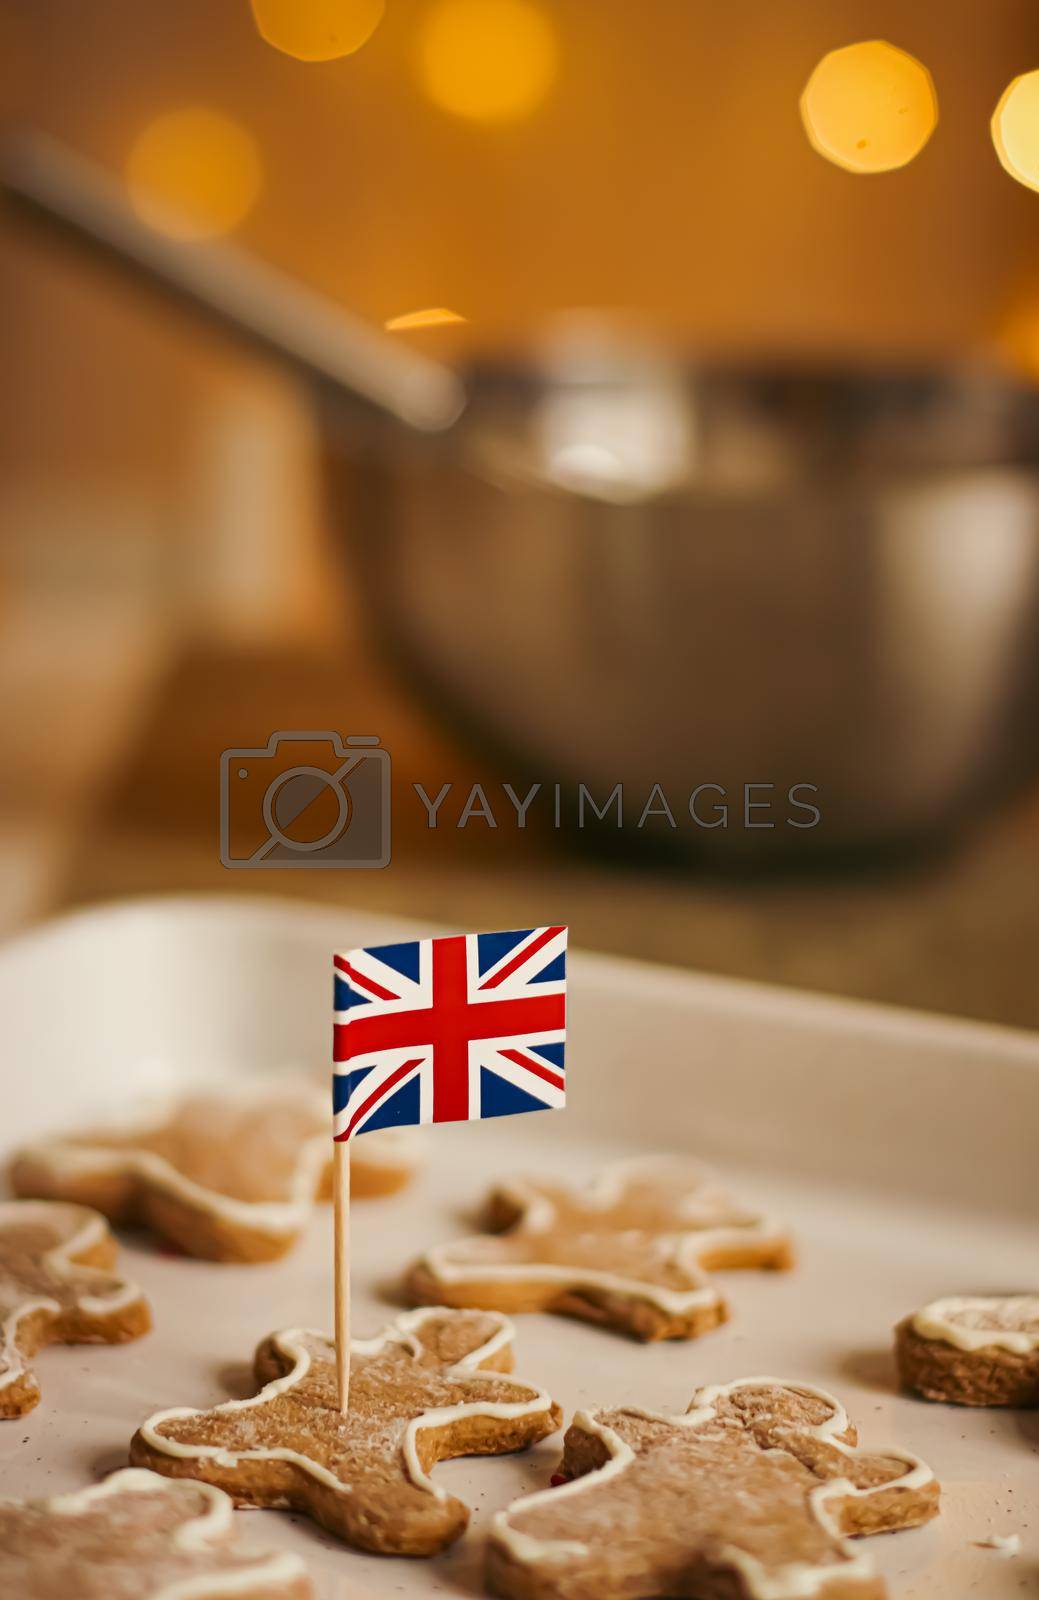 Royalty free image of British holiday and Christmas baking concept. Union Jack flag of Great Britain and gingerbread men biscuits in the kitchen in England by Anneleven